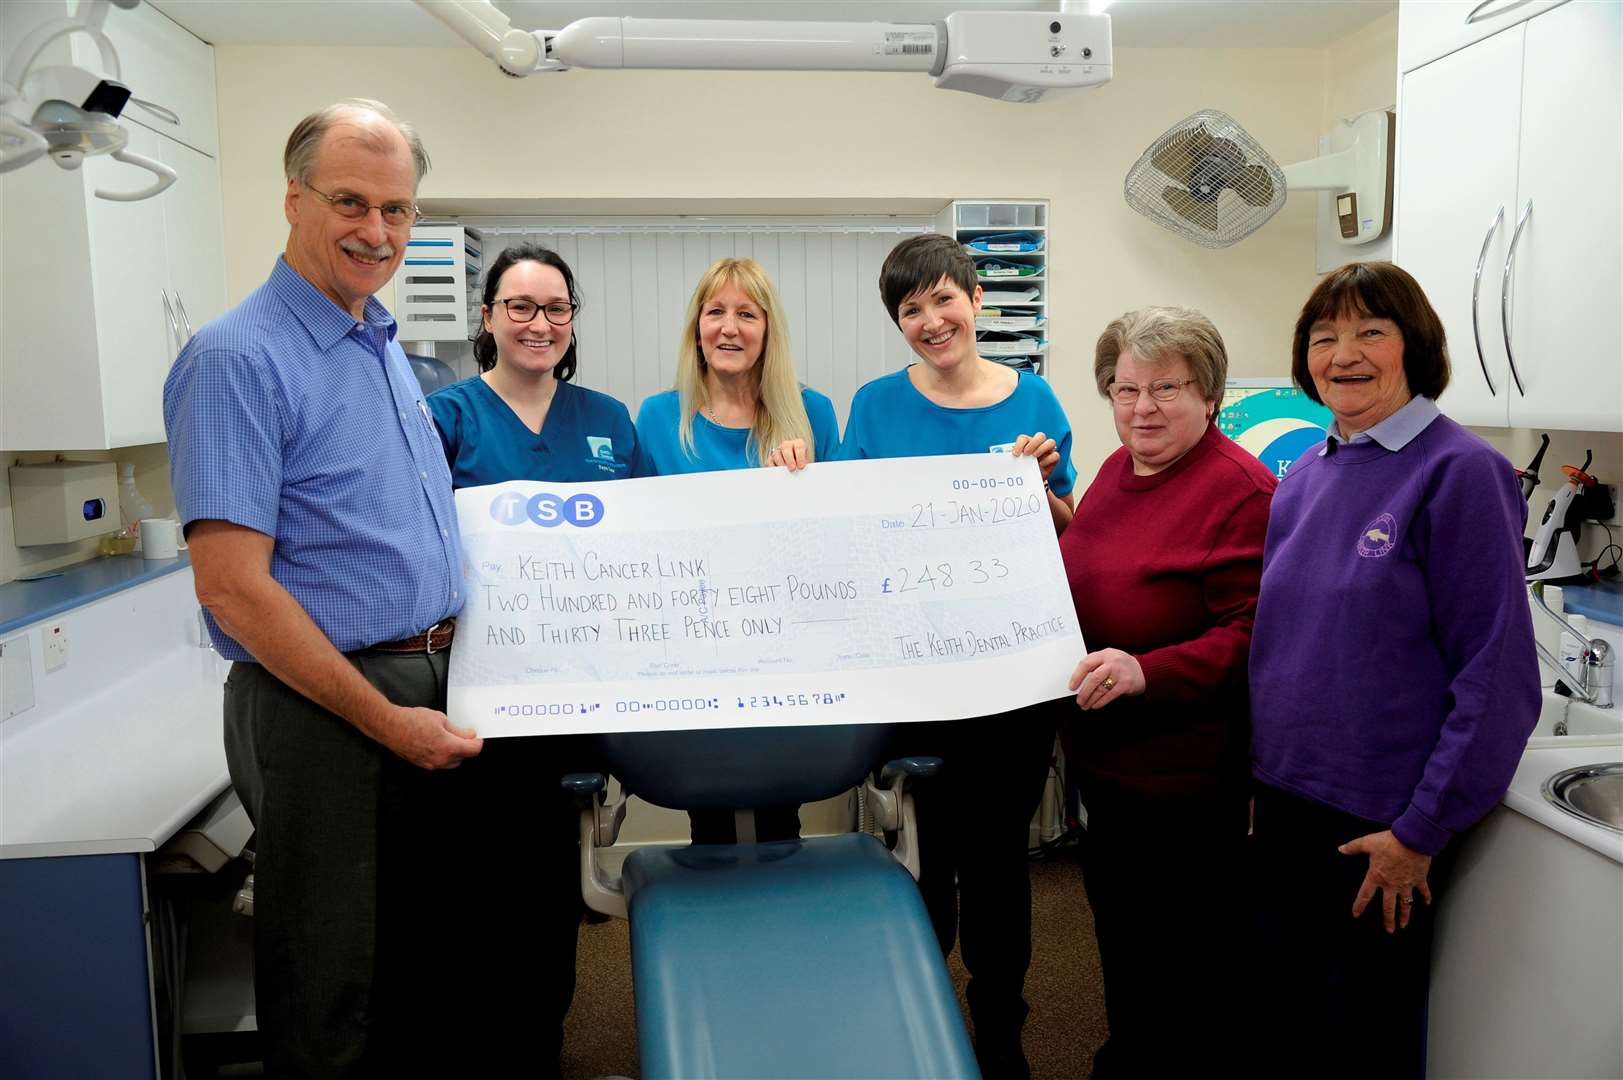 Pictured from left: Principal dentist Theodor Hansen, senior dental nurse Faye Law, receptionist Mo MacDougall, practice manager Erin Jellis. The cheque for £248.33 is being presented to Keith Cancer Link members Ann Cameron and Isobell Sadowski.